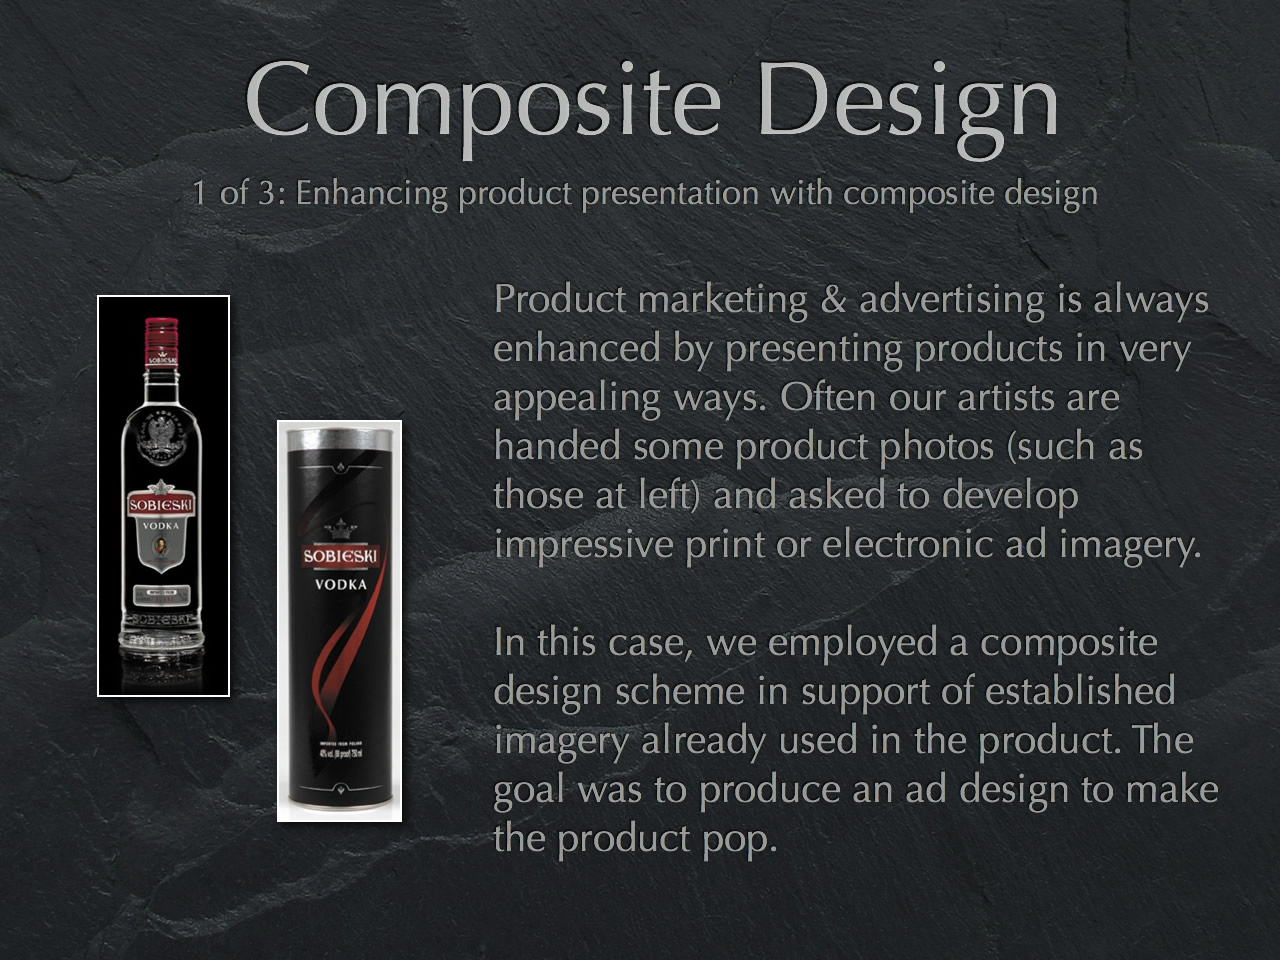 Composite design can take simple images and significantly enhance them